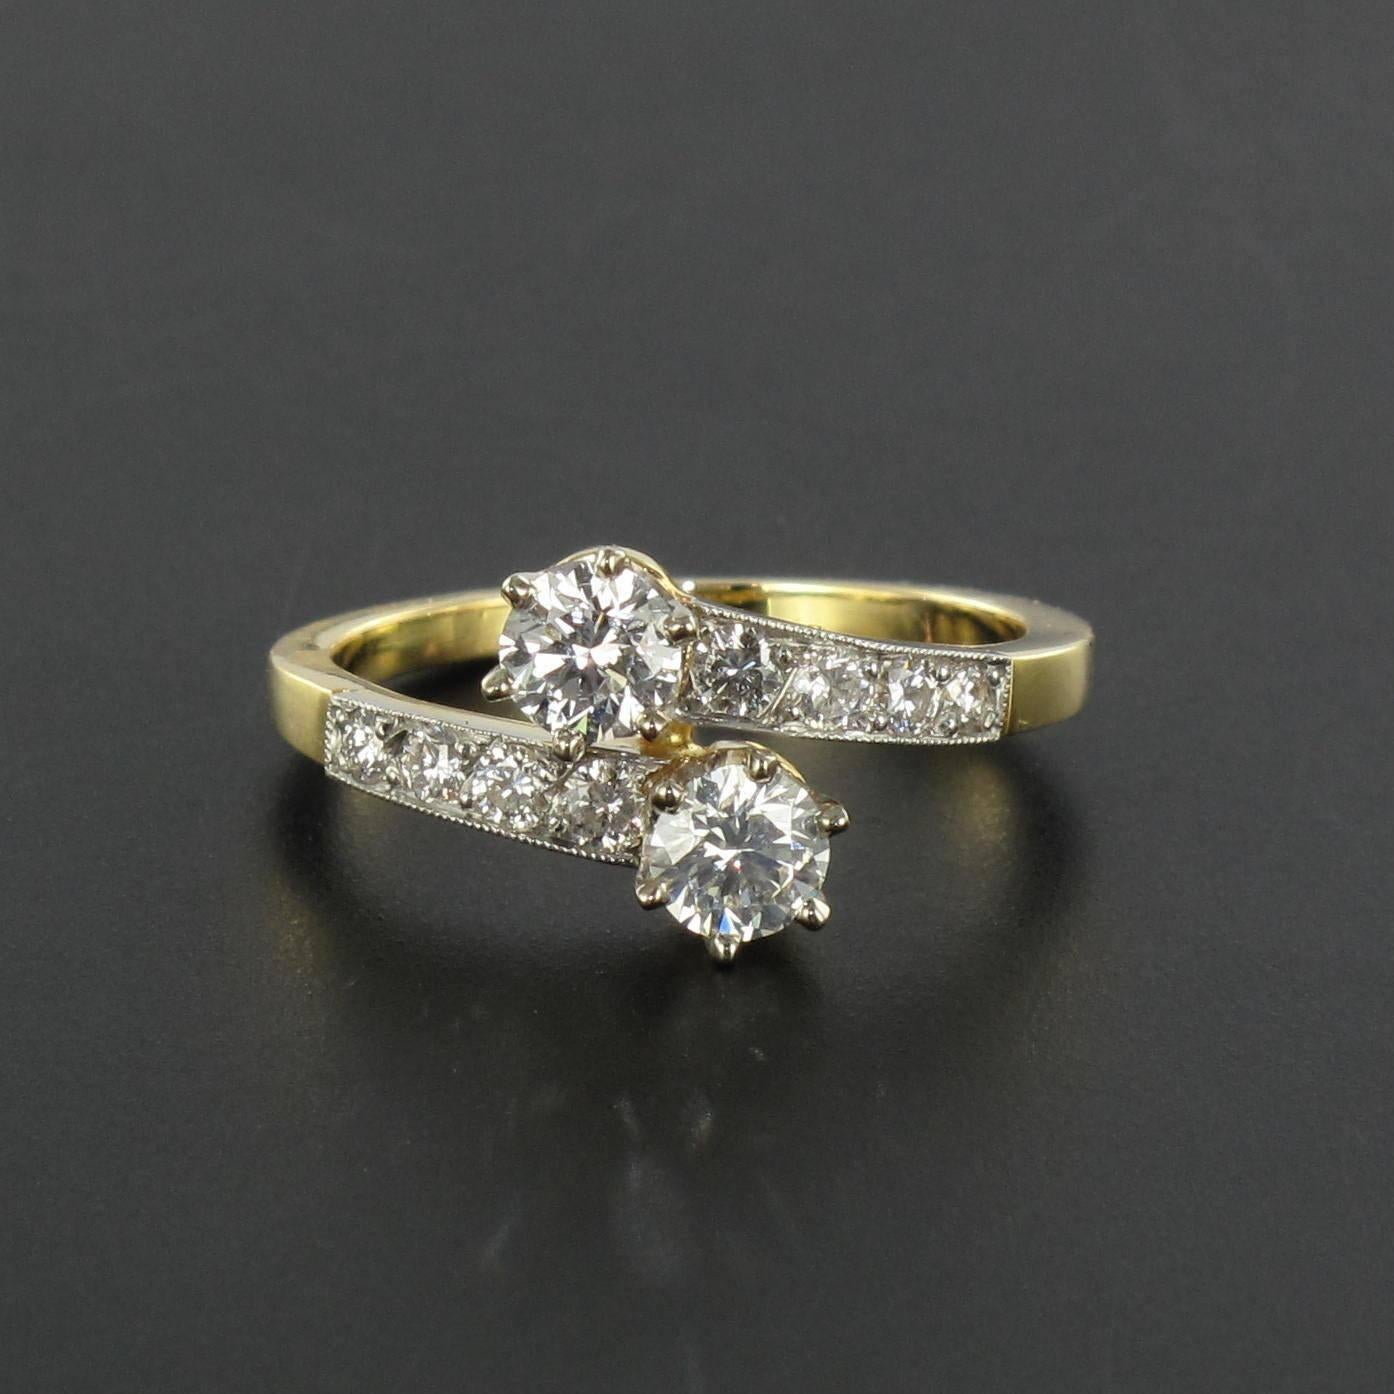 Ring in platinium and 18 carat yellow gold, eagle head hallmark.   

This Lovers ring is claw set with 2 brilliant cut diamonds. The beginning of the ring band on each side is set with 4 diamonds.   

Total 2 center diamond weight: 0,77 carat.